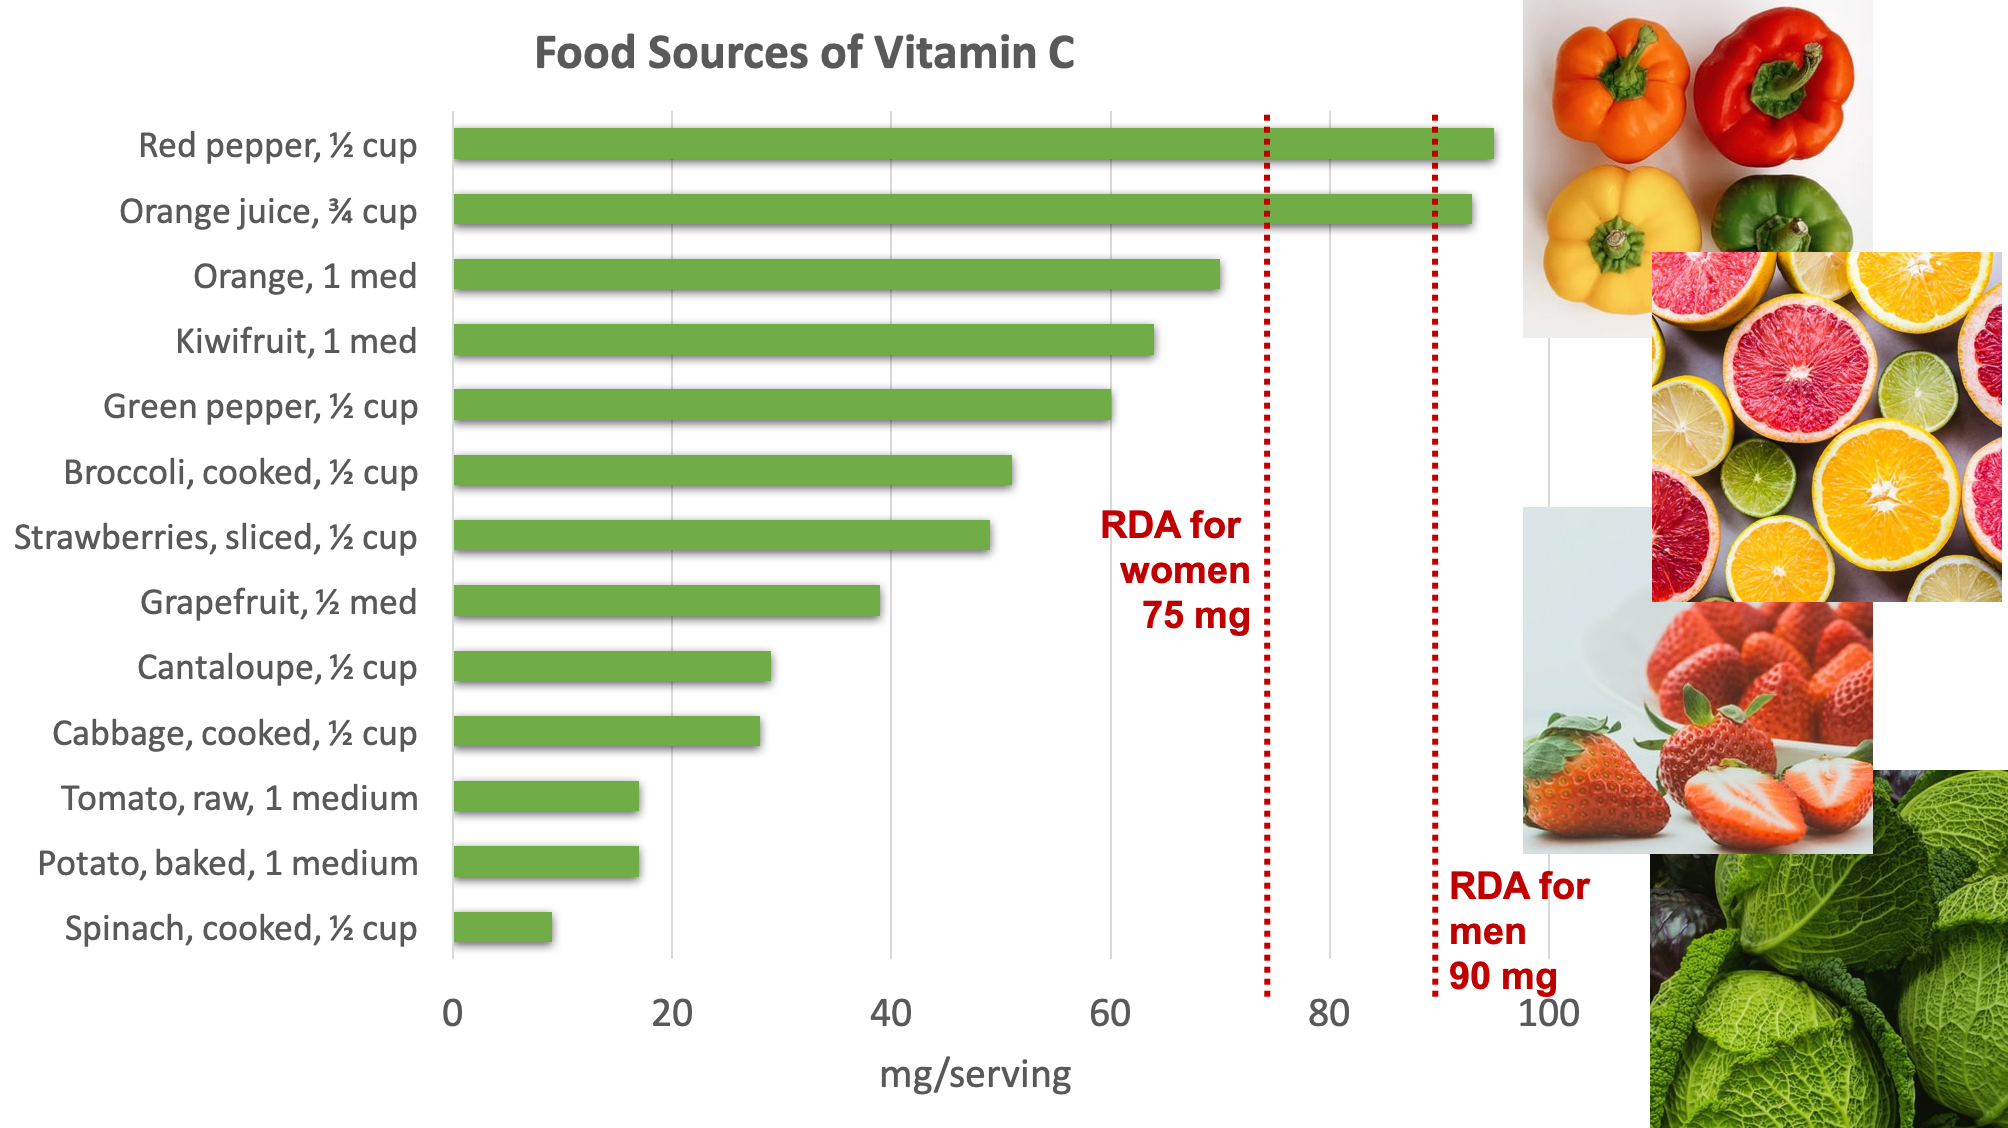 Bar graph showing dietary sources of vitamin C compared with the RDA for adult women of 75 mg per day and for adult men of 90 mg per day. Top sources include bell peppers, citrus fruits and juices, kiwifruit, broccoli, strawberries, cantaloupe, cabbage, tomatoes, potatoes, and spinach. Photos are shown of bell peppers, citrus fruits, strawberries, and cabbage.